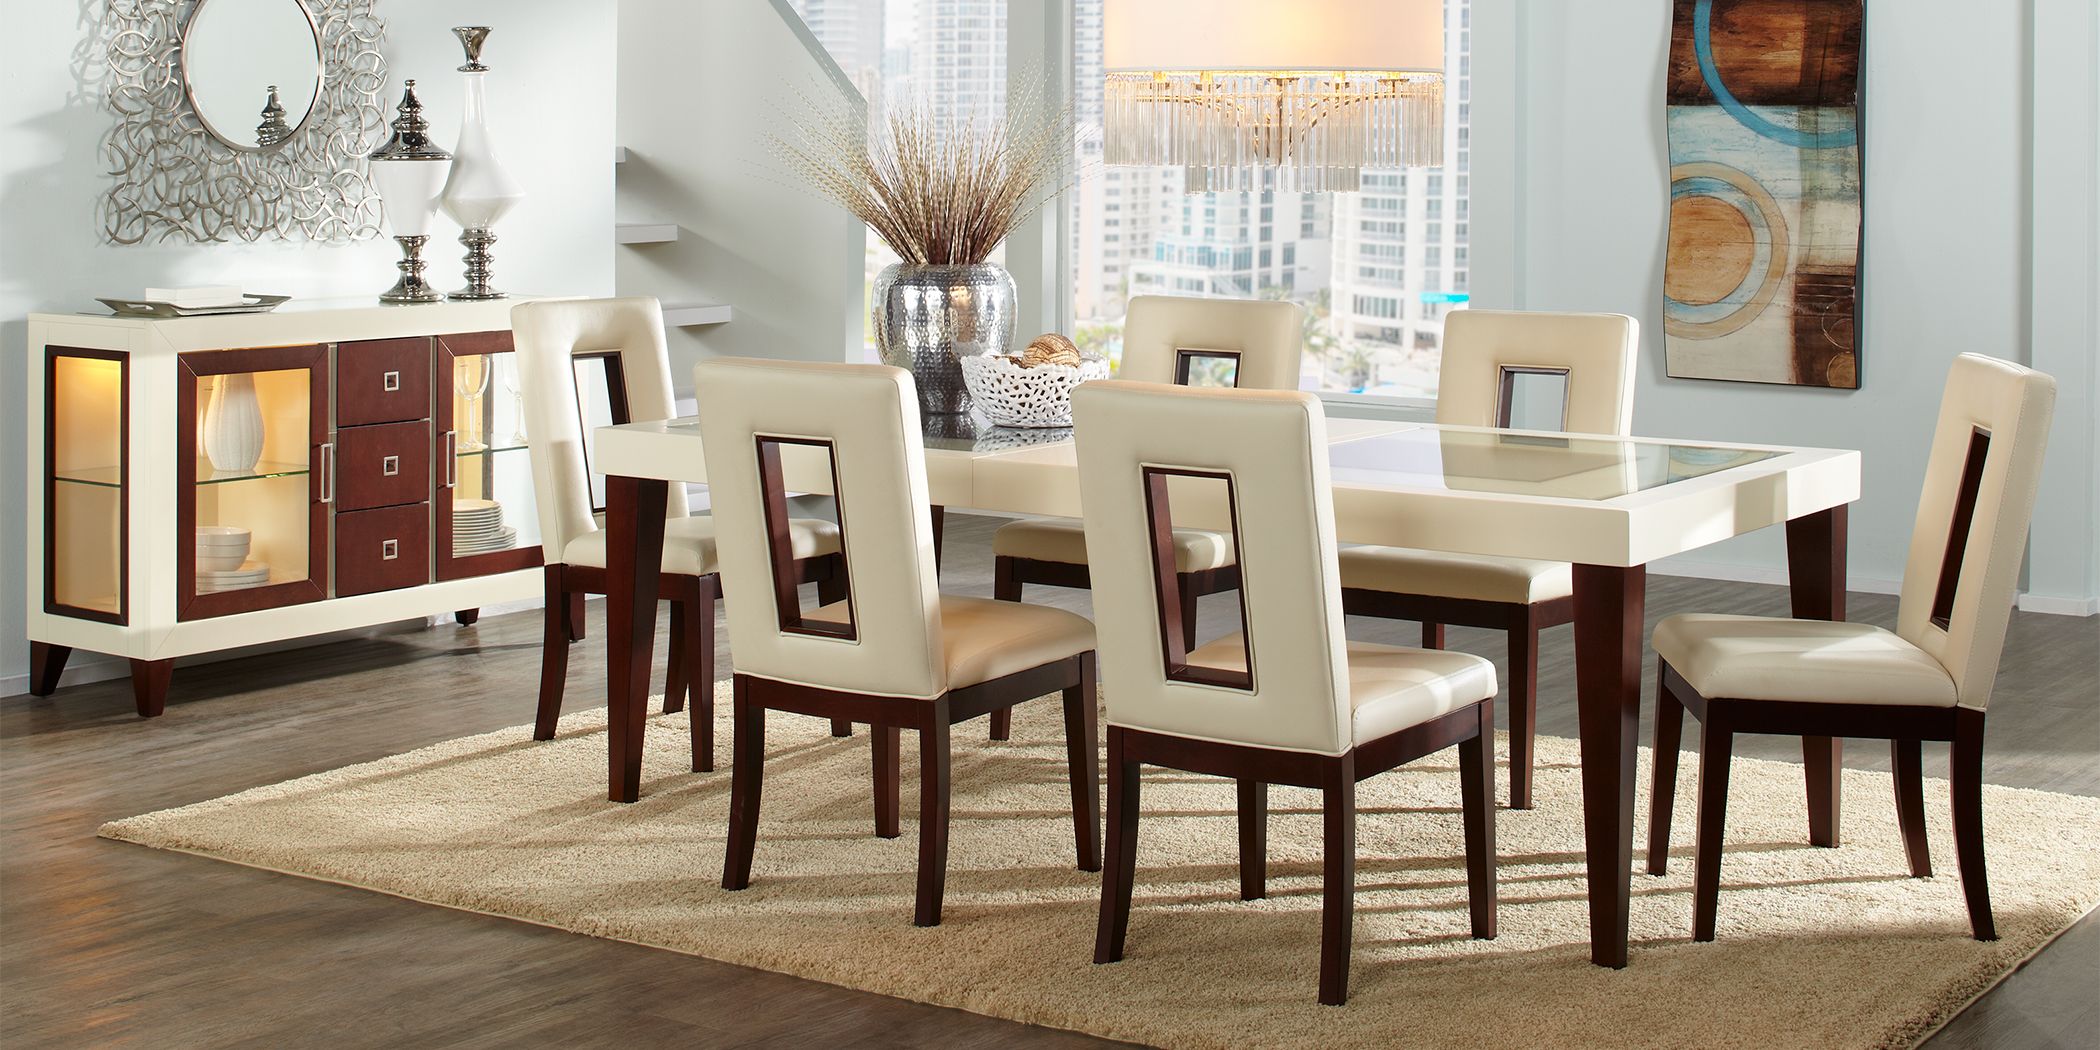 Dining Room Table Chair Sets For Sale